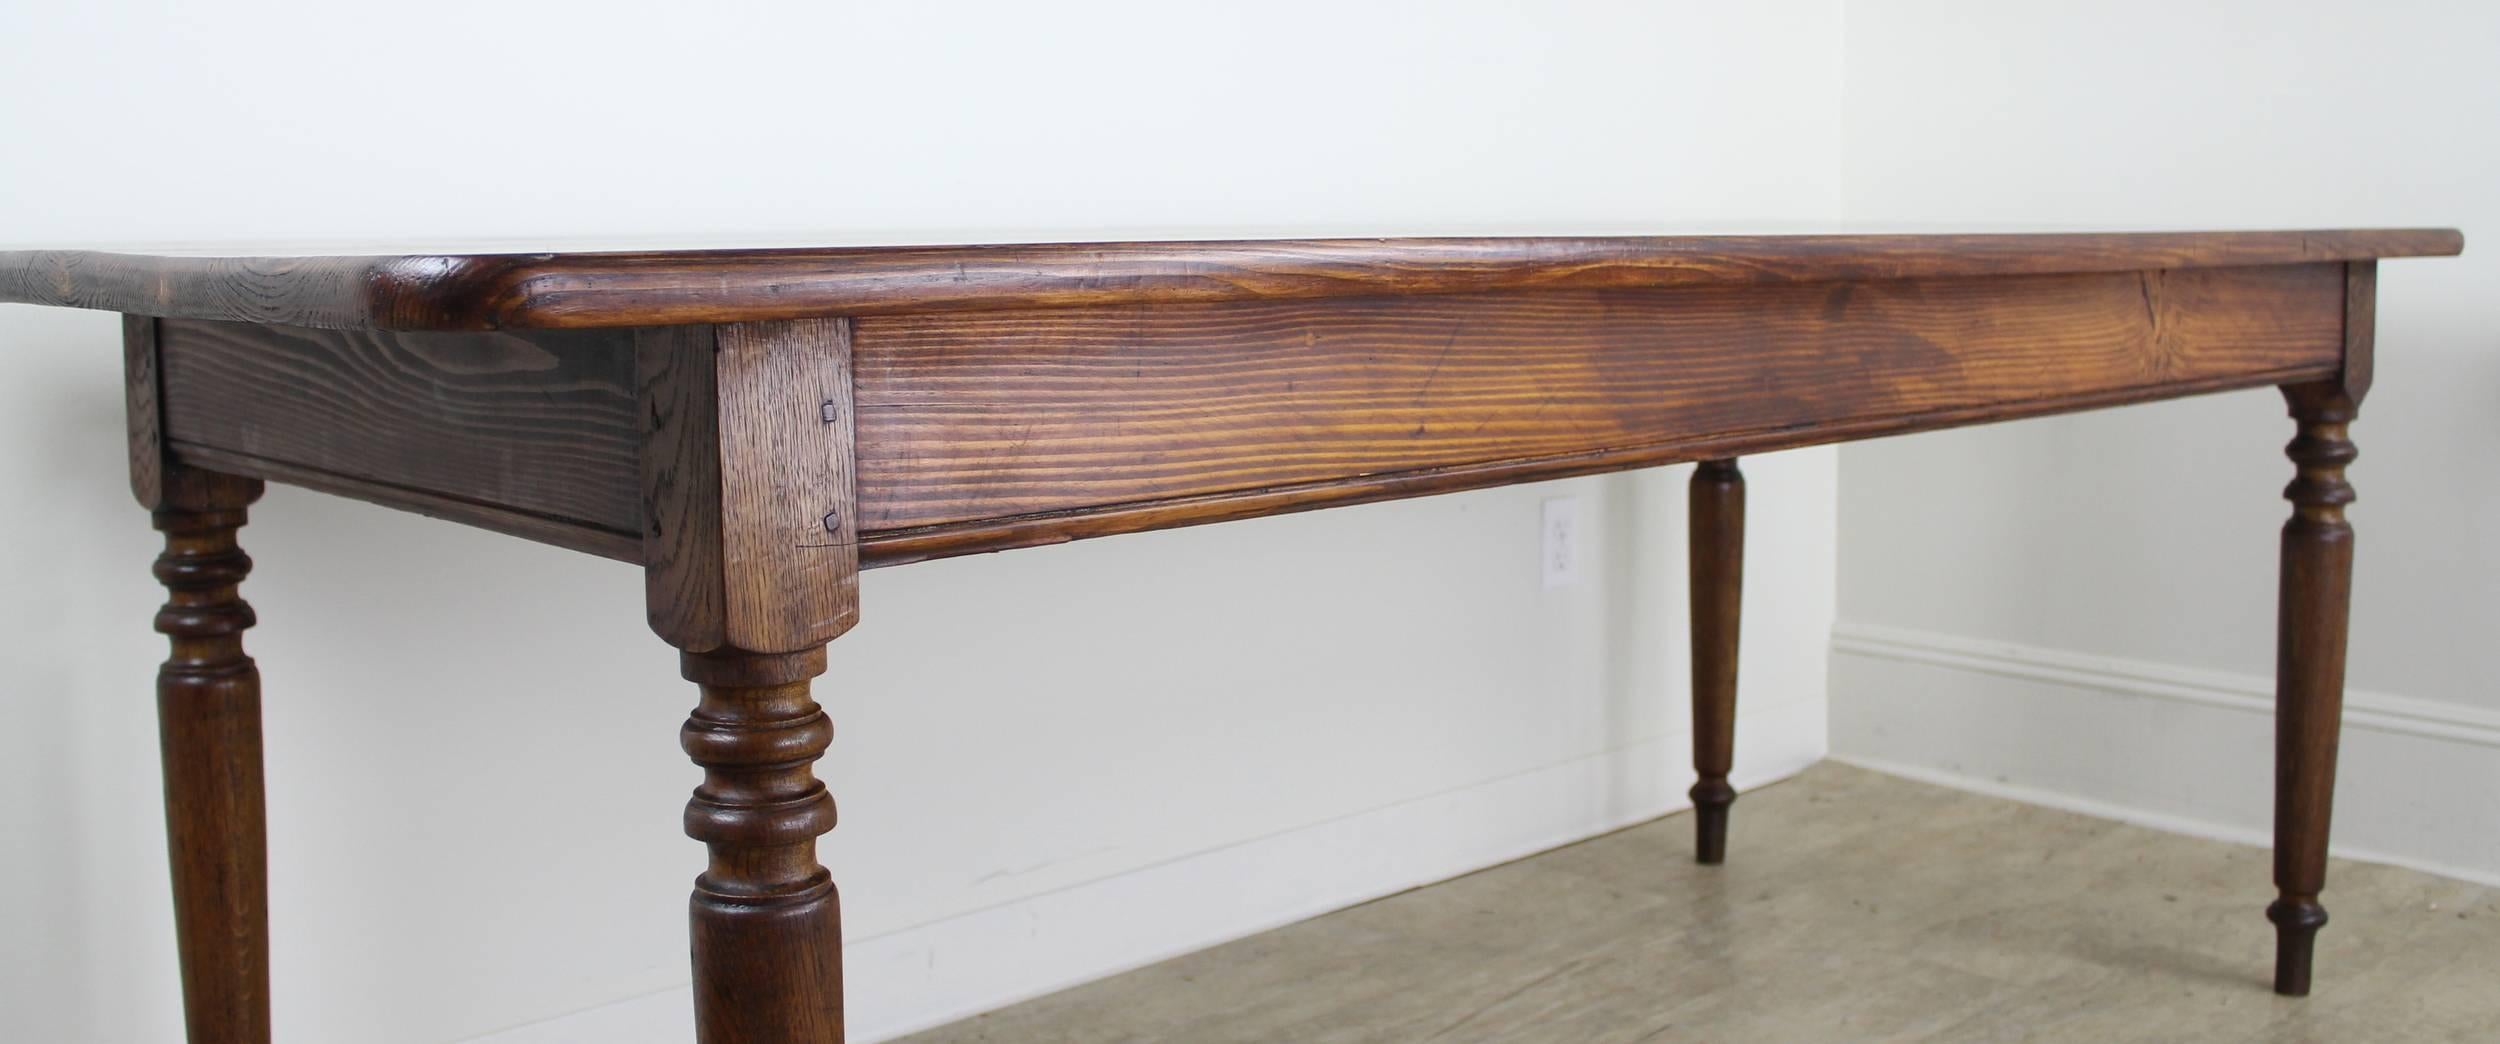 19th Century Antique Pine Farm Table with Turned Legs